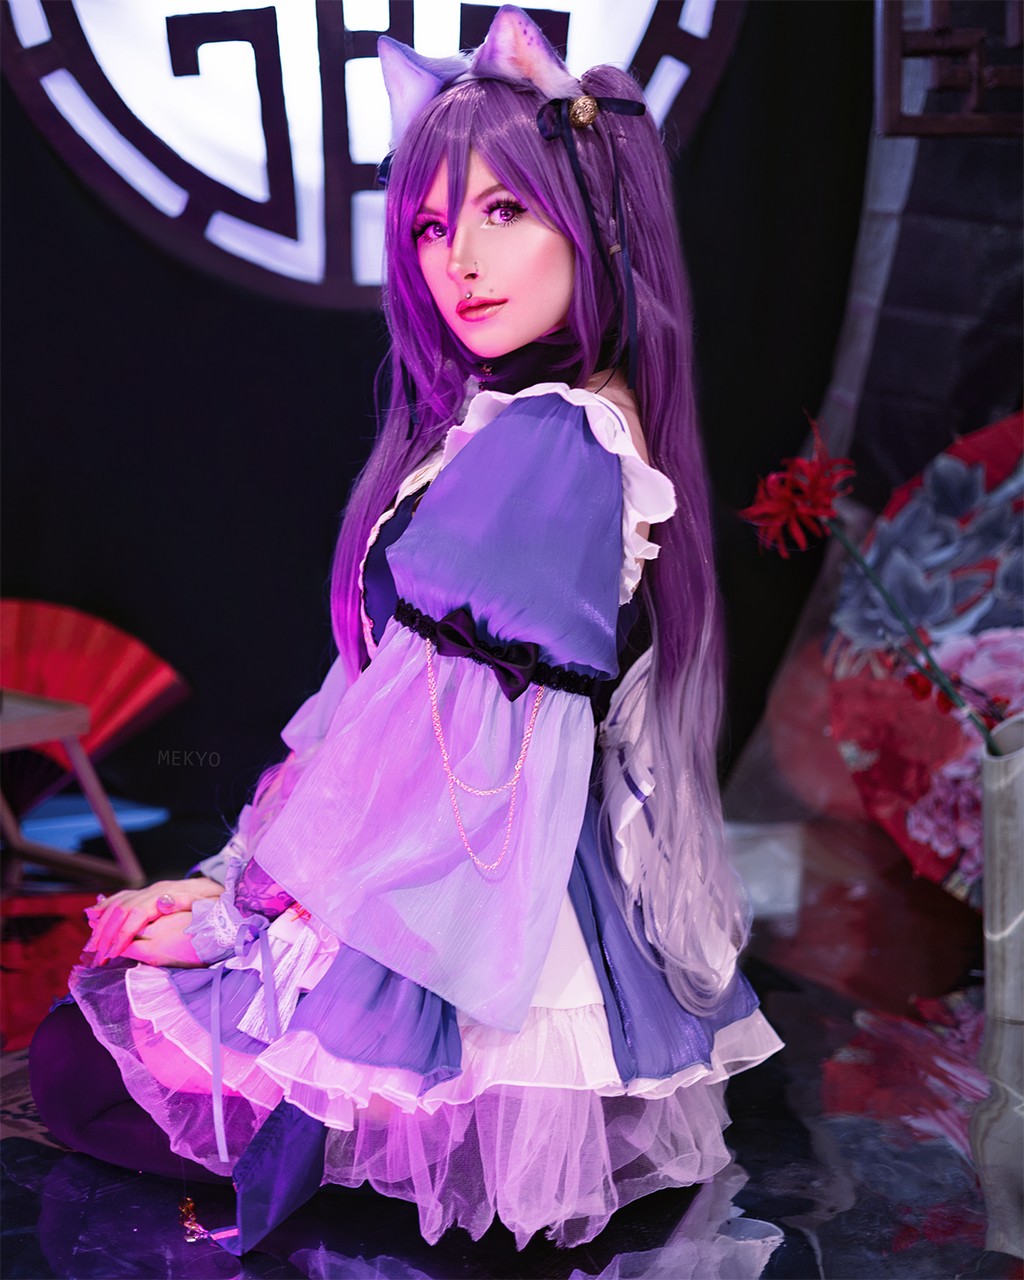 Waiting For You Keqing From Genshin Impact Maid Ver Cosplay By Mekyo382 Sel